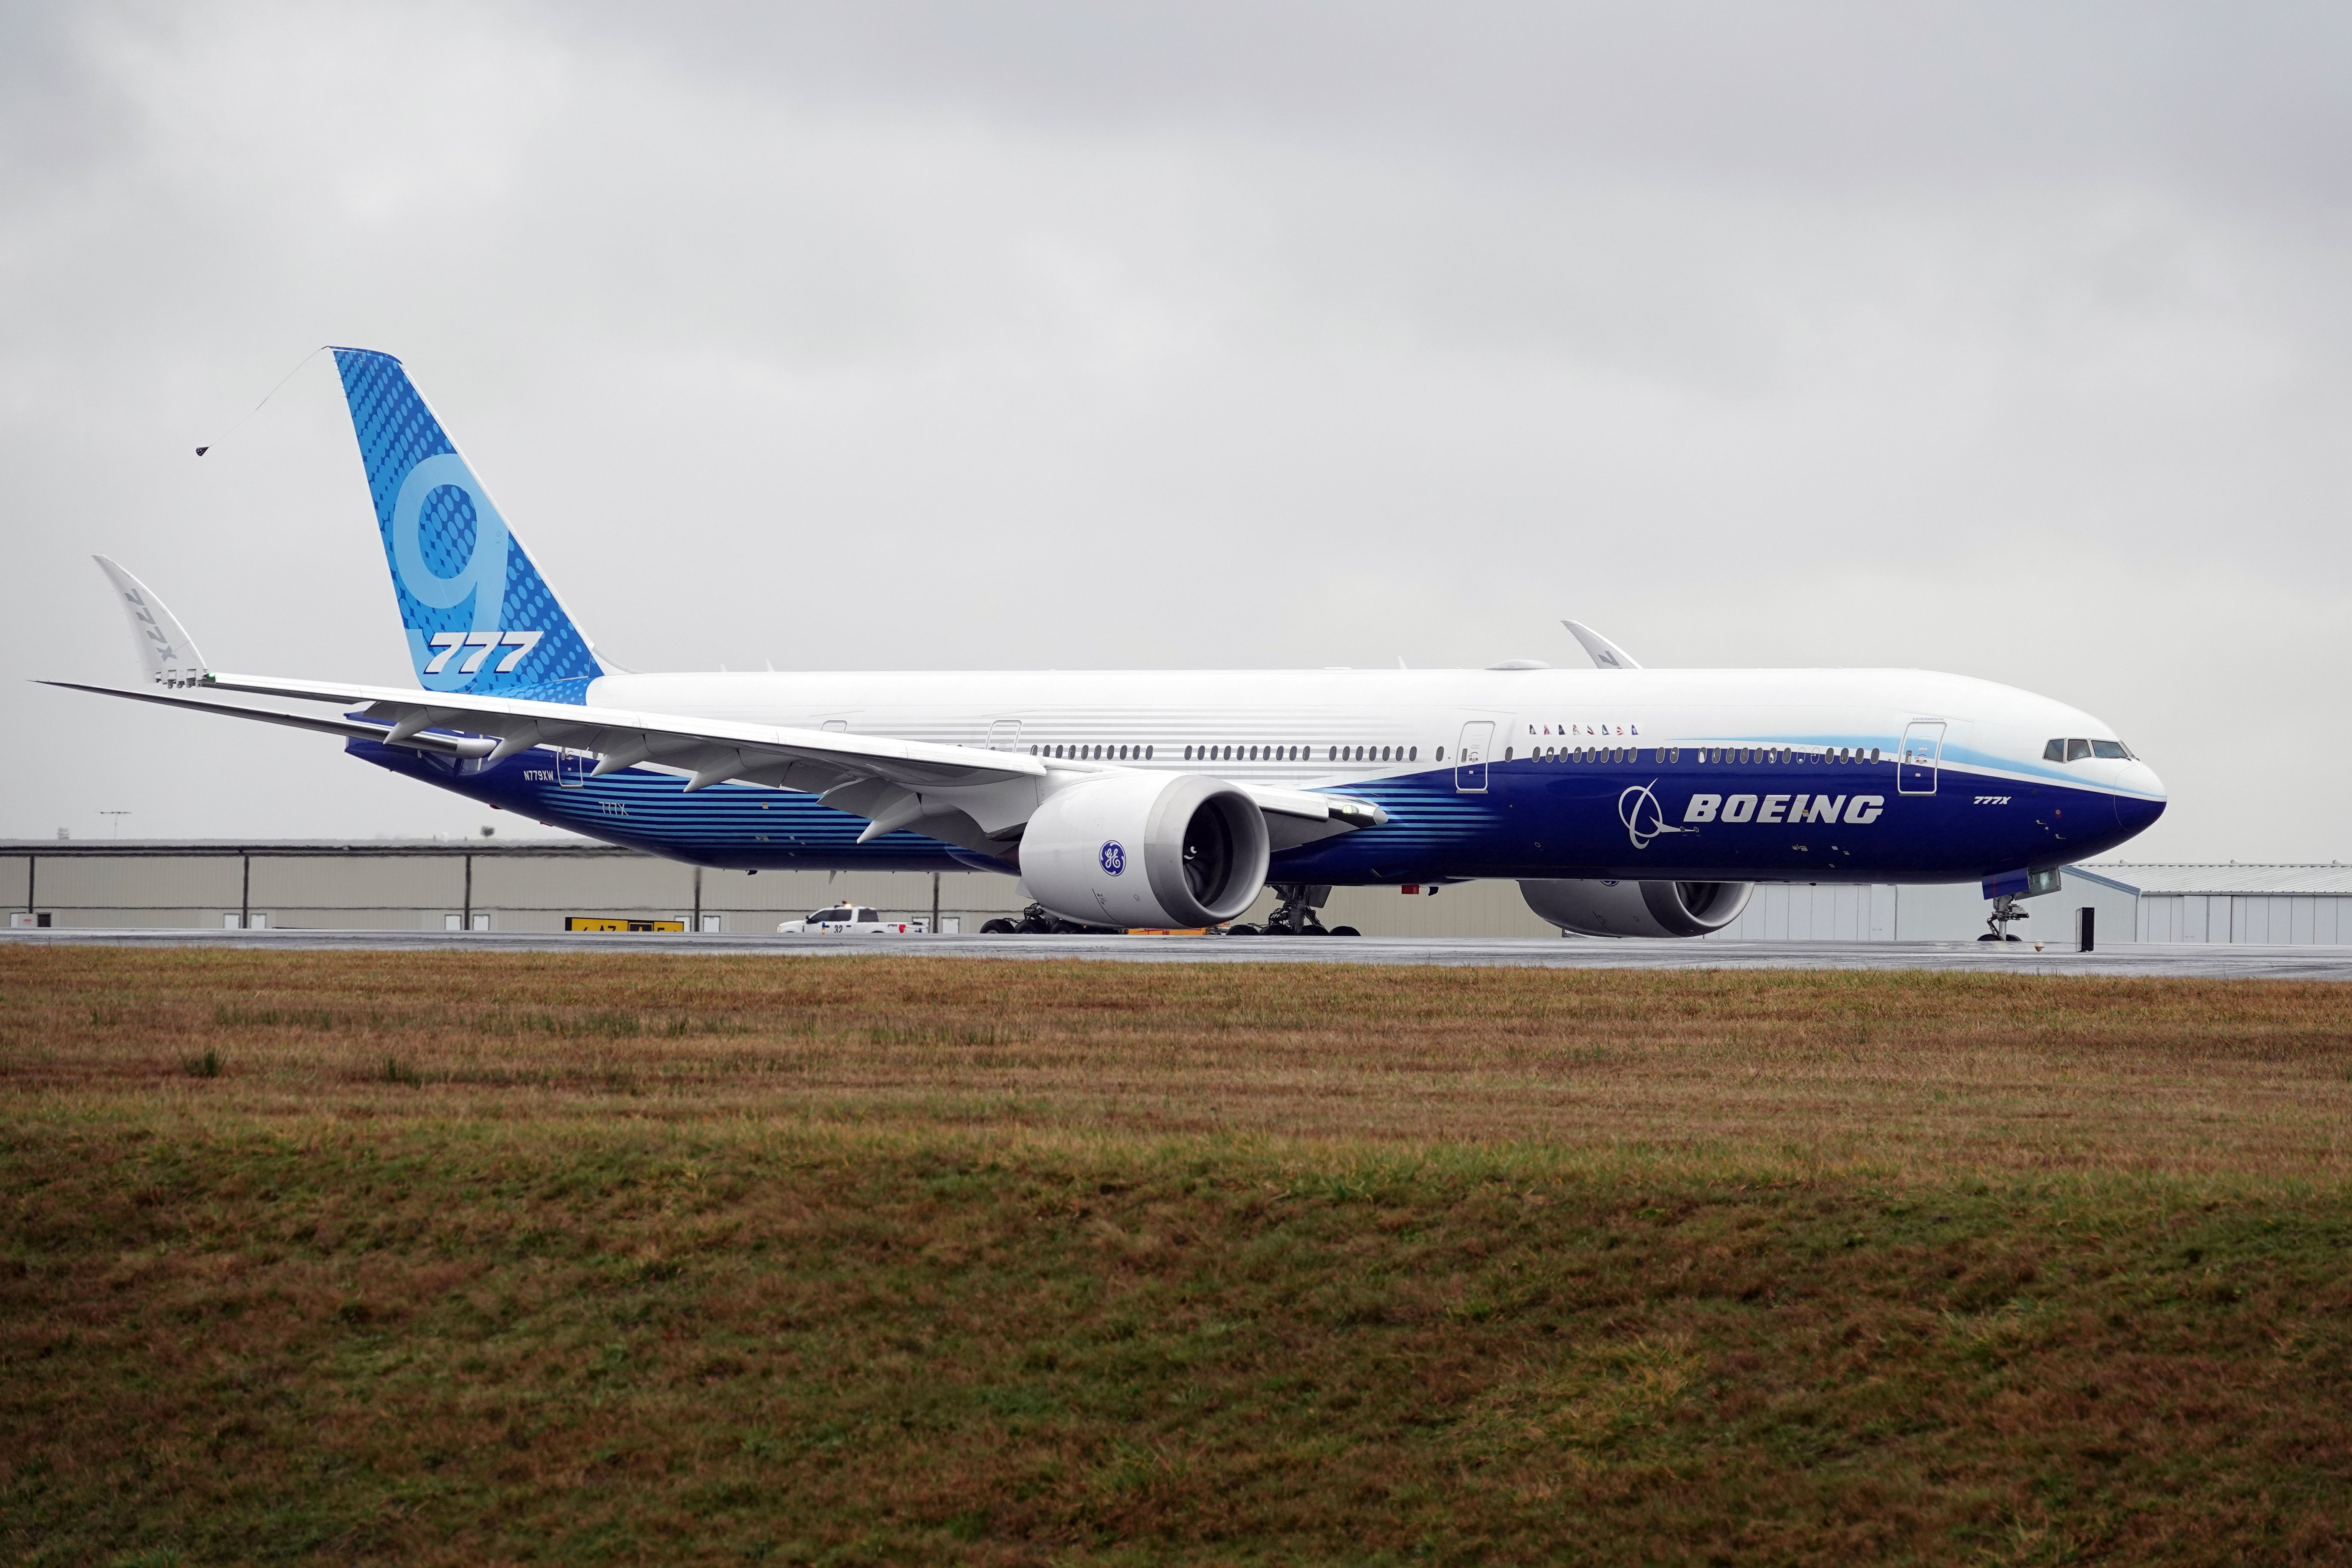 A Boeing 777X taxiing to the runway.